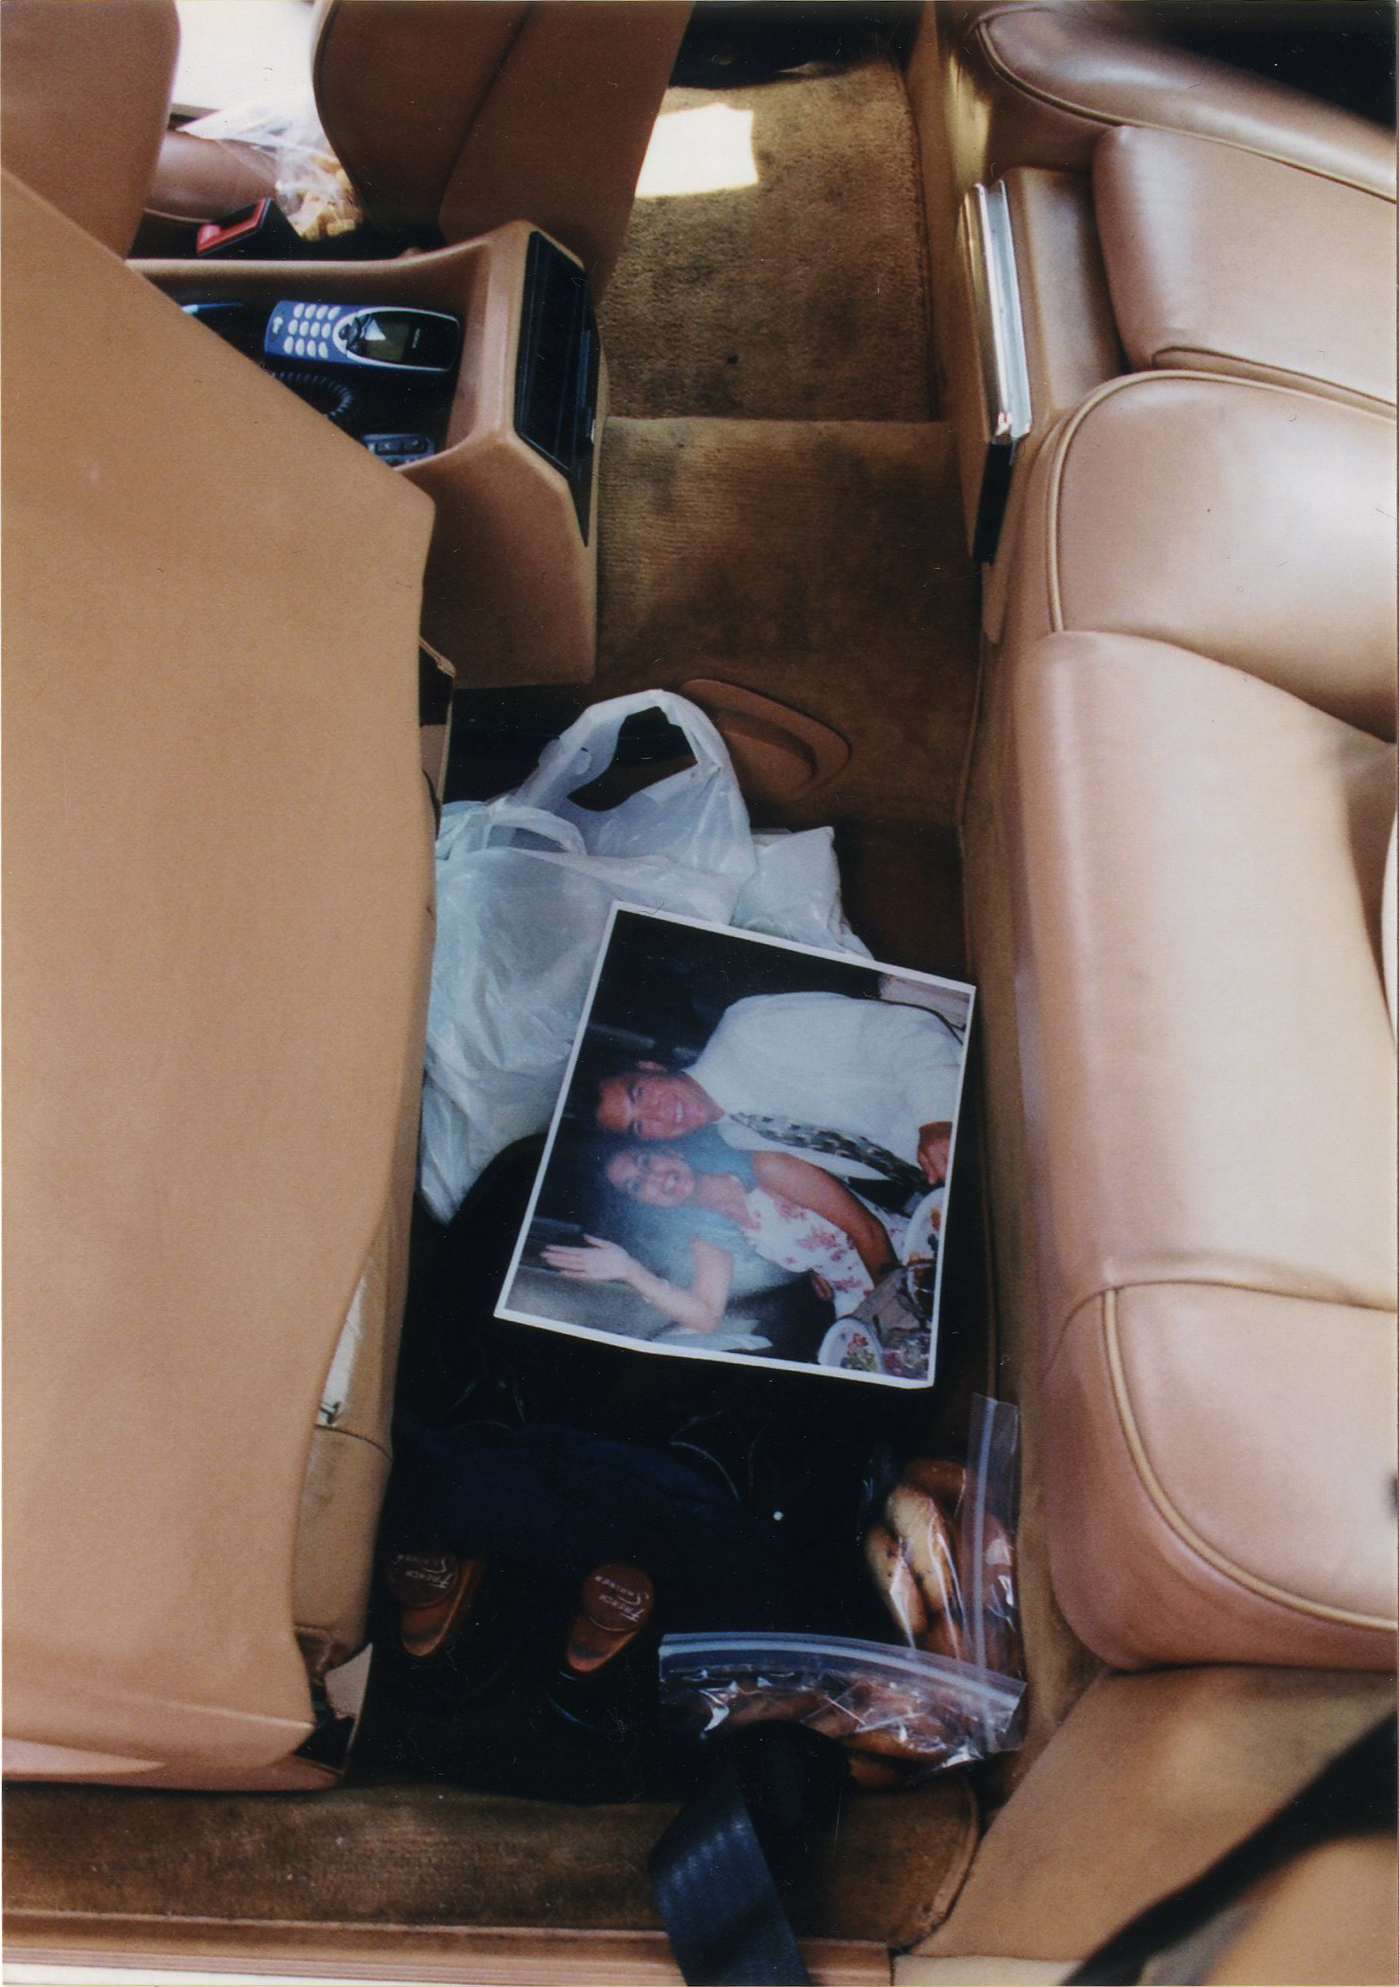 A photo of Scott and Laci Peterson found inside Scott Peterson's car when it was searched in 2003.